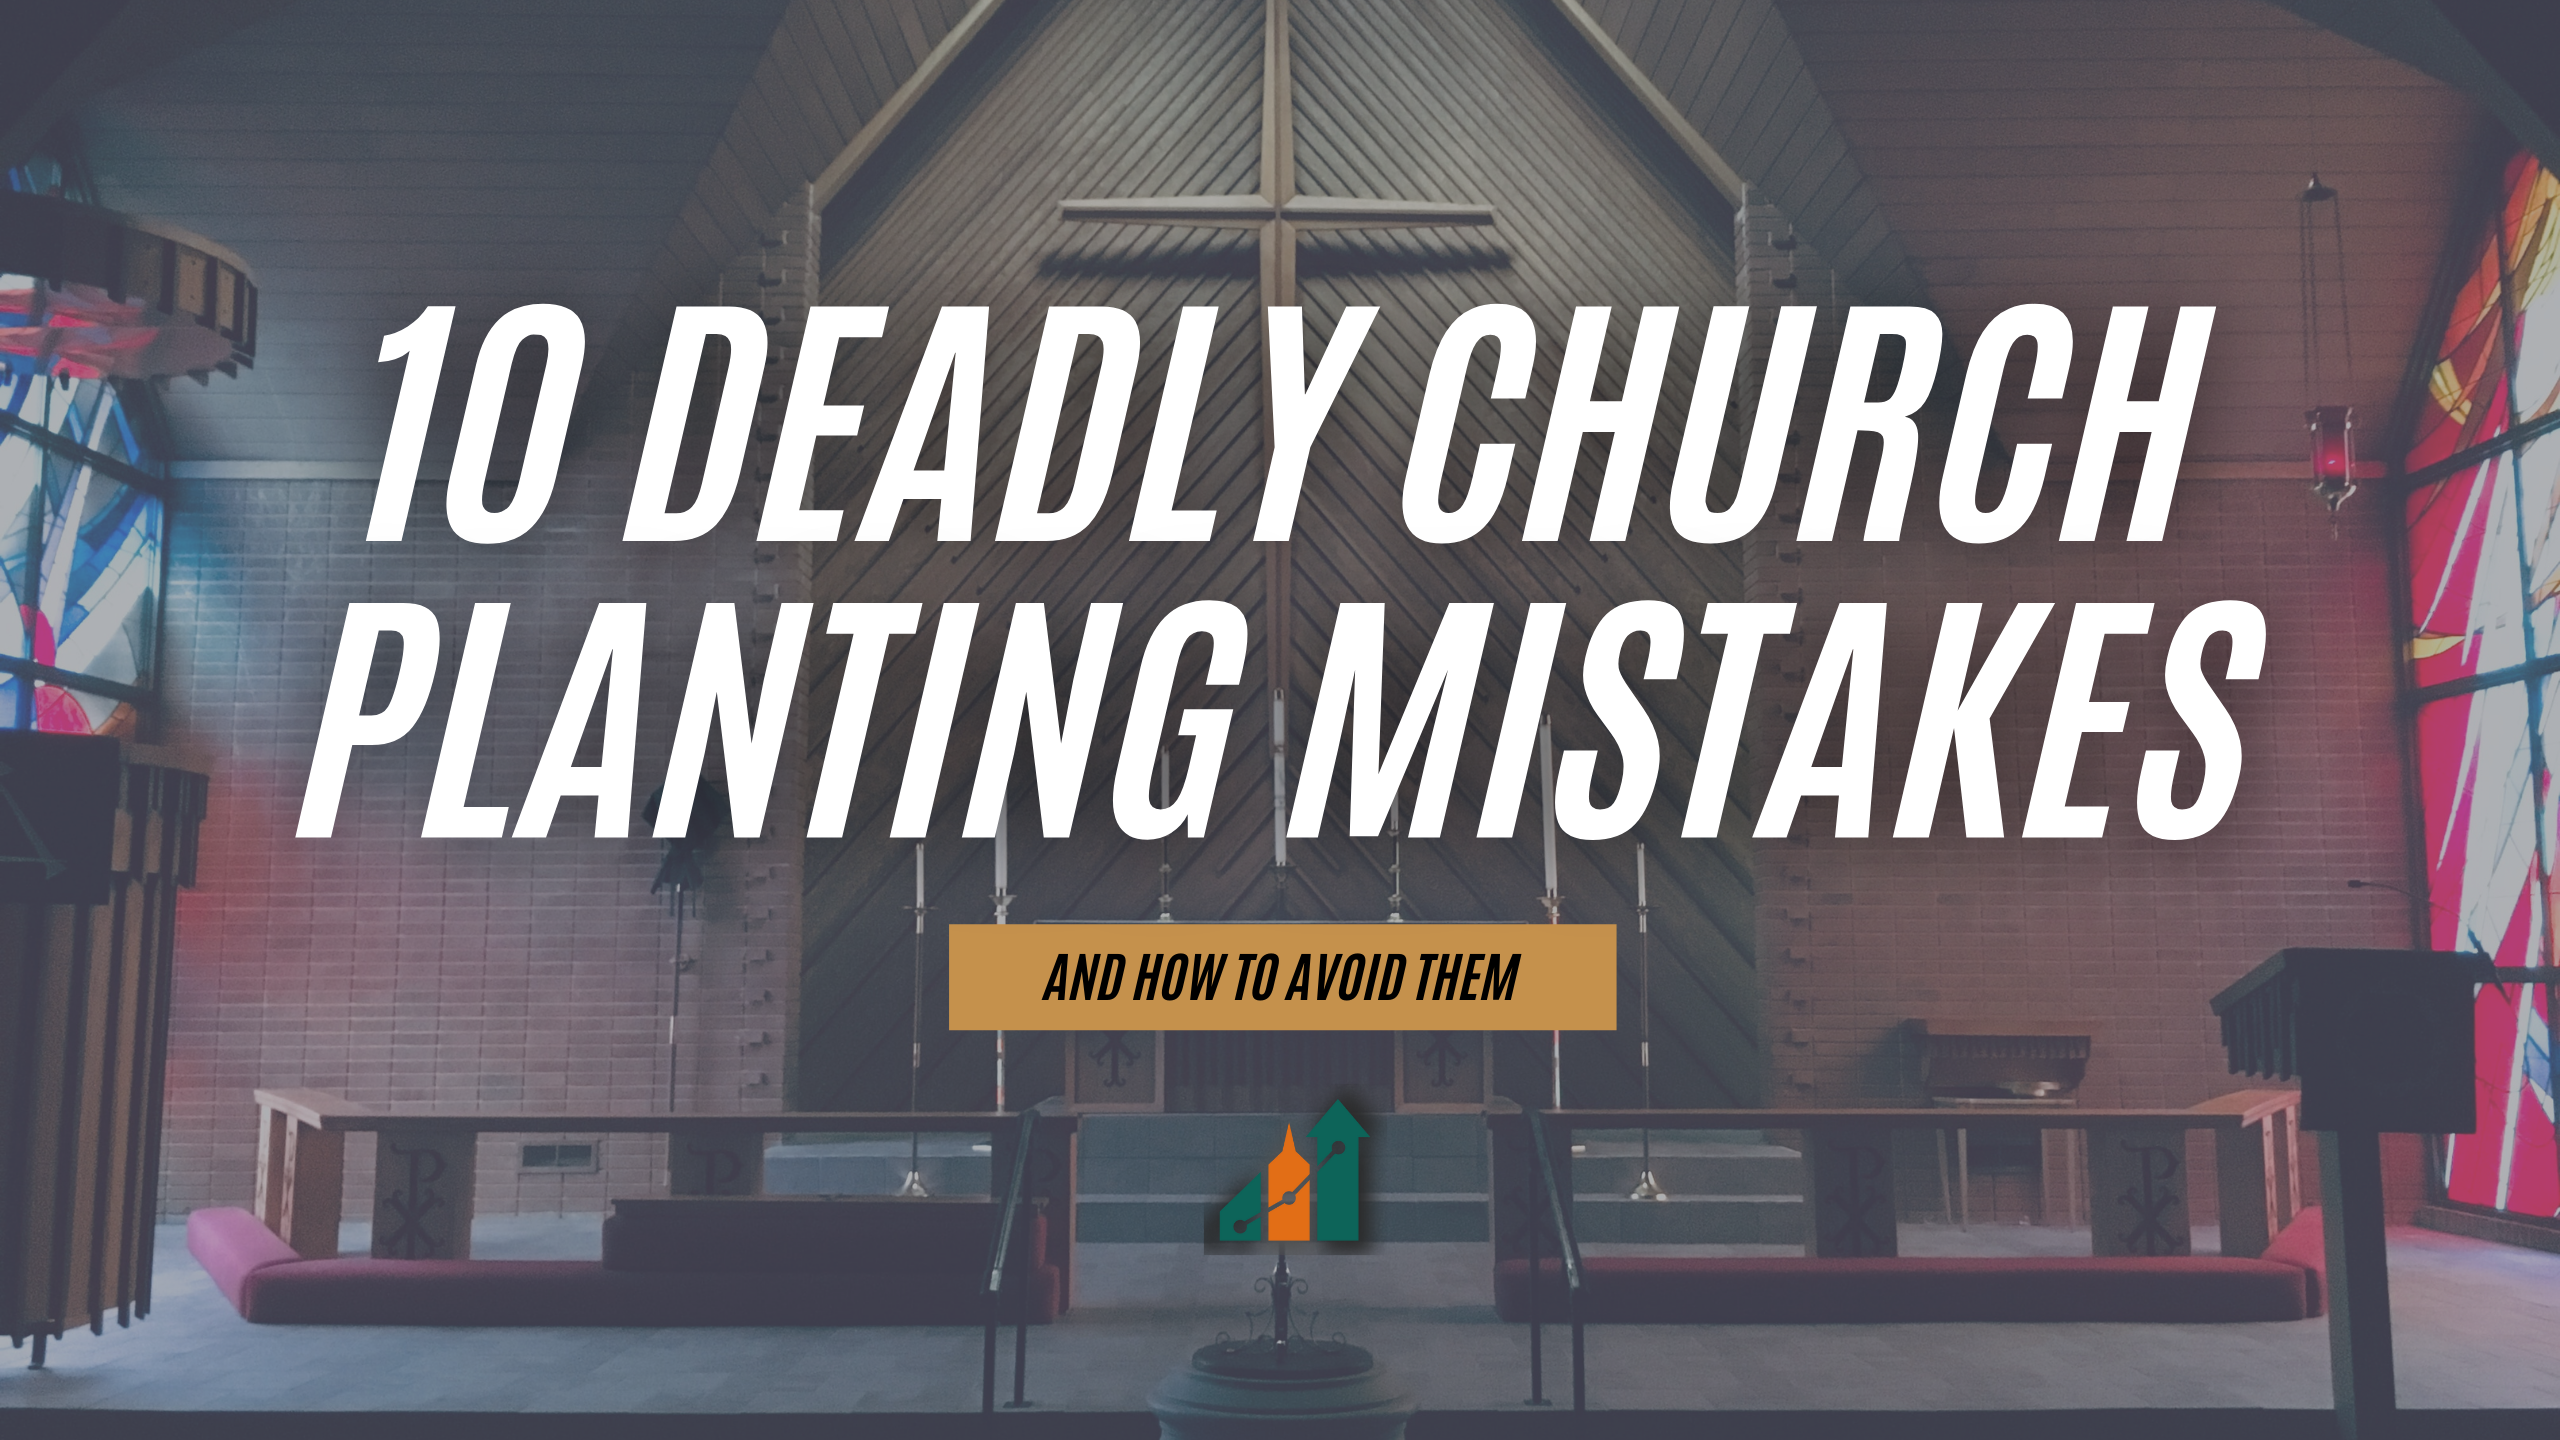 10-deadly-church-planting-mistakes_header-image